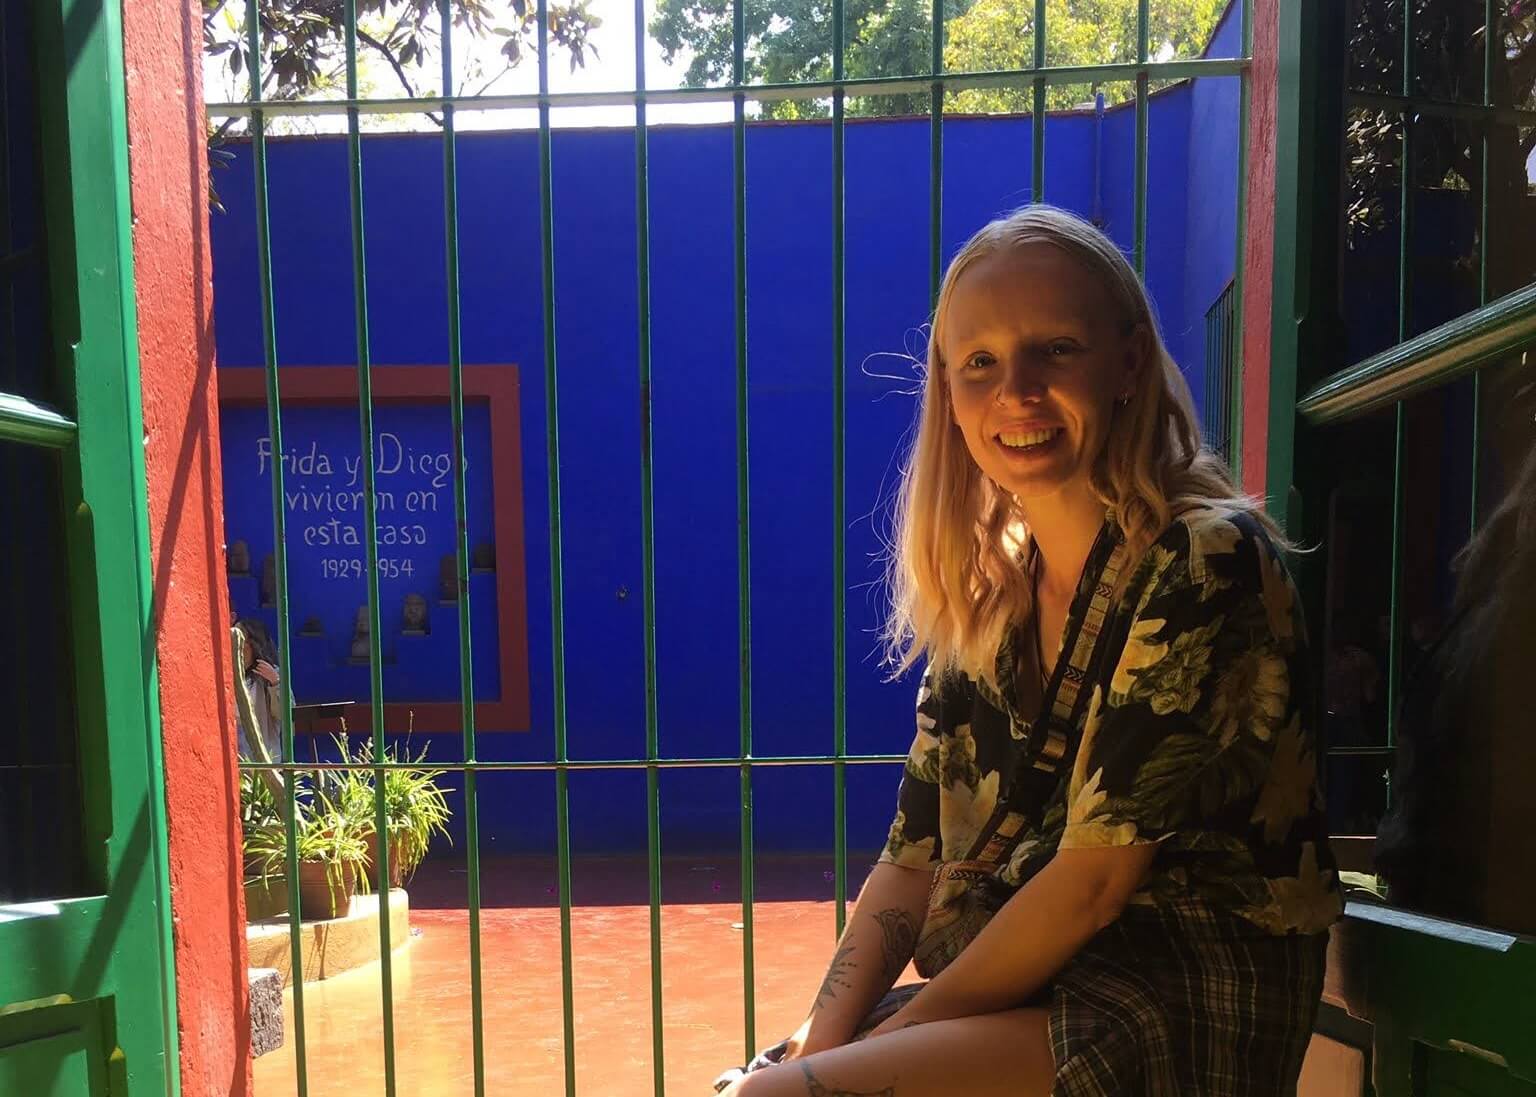 Laura smiling in front of bars on a door in Frida Kahlo's house, Casa Azul in Mexico City